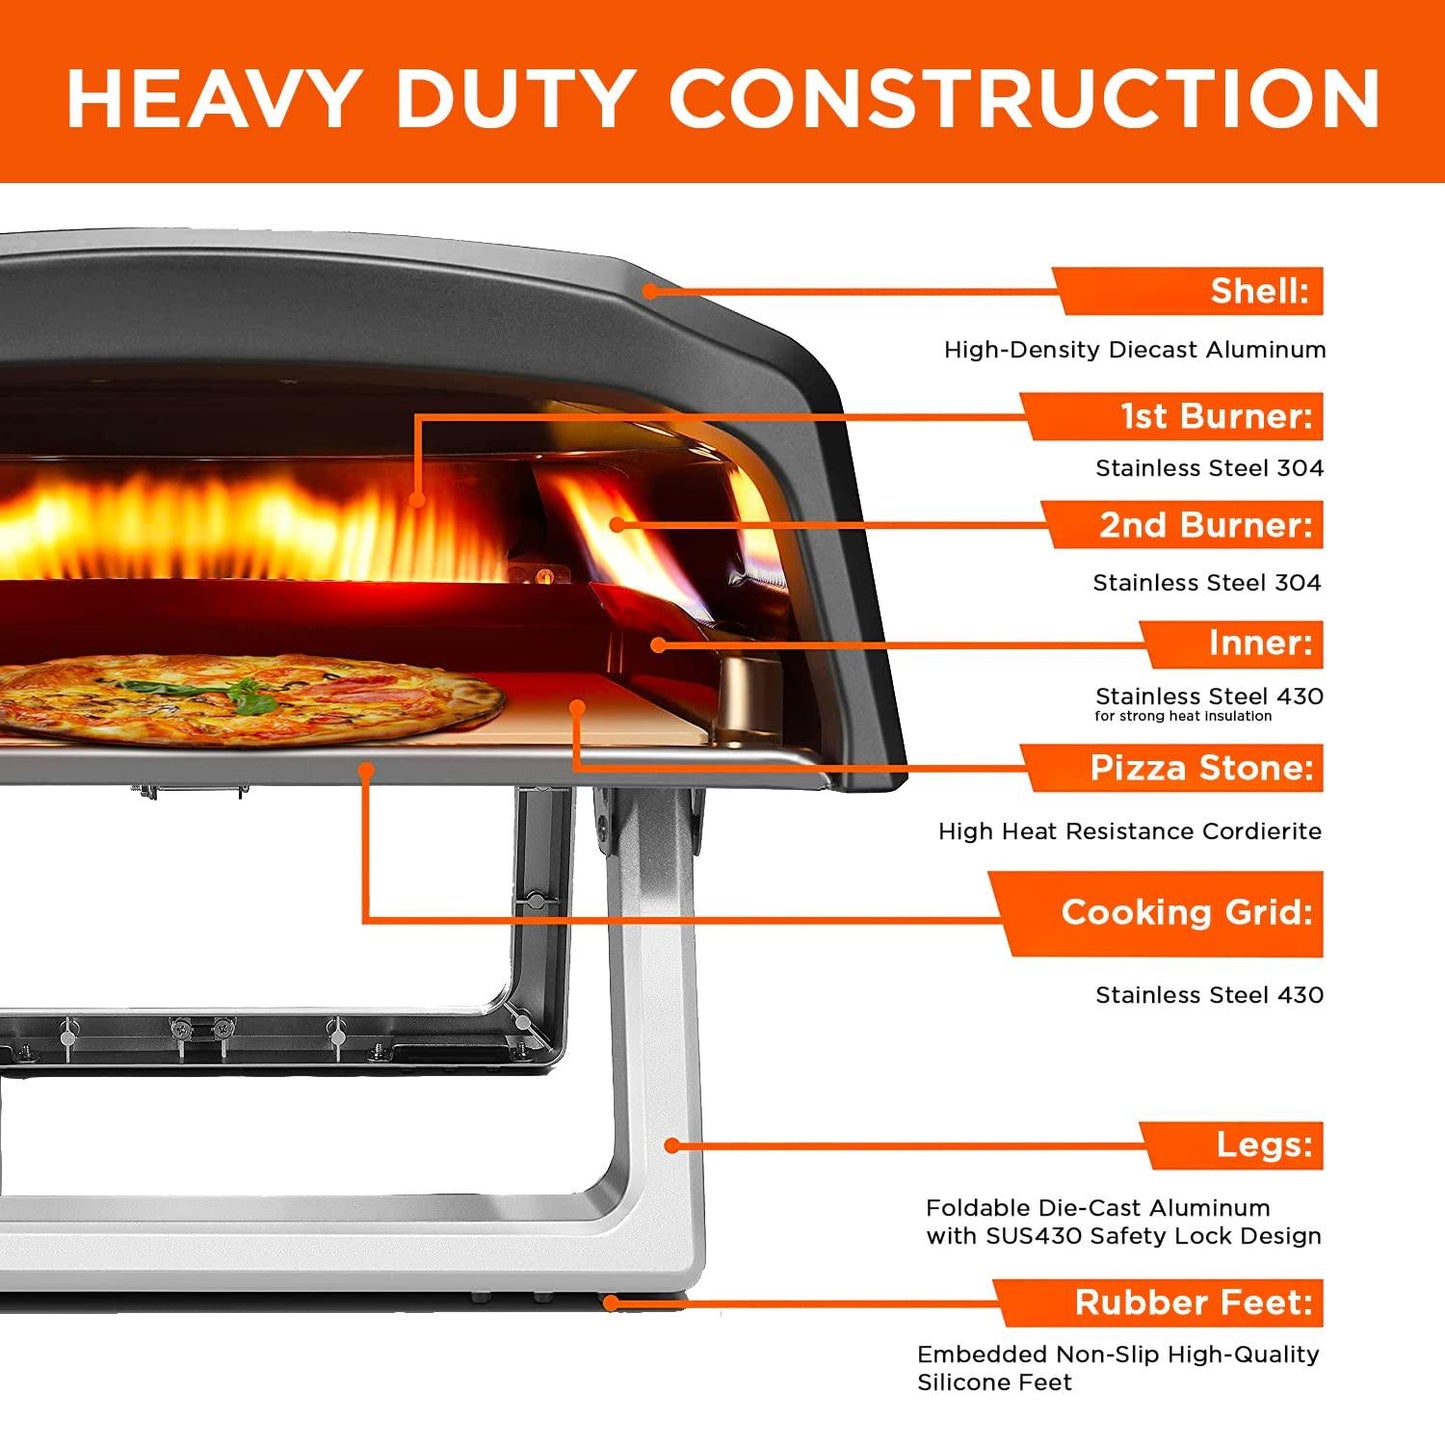 Commercial Chef Pizza Oven Outdoor - Gas Pizza Oven Propane - Portable Pizza Ovens for Outside - Stone Brick Pizza Maker Oven Grill - with Pizza Oven Door, Peel, Pizza Stone, Cutter, and Carry Cover - CookCave